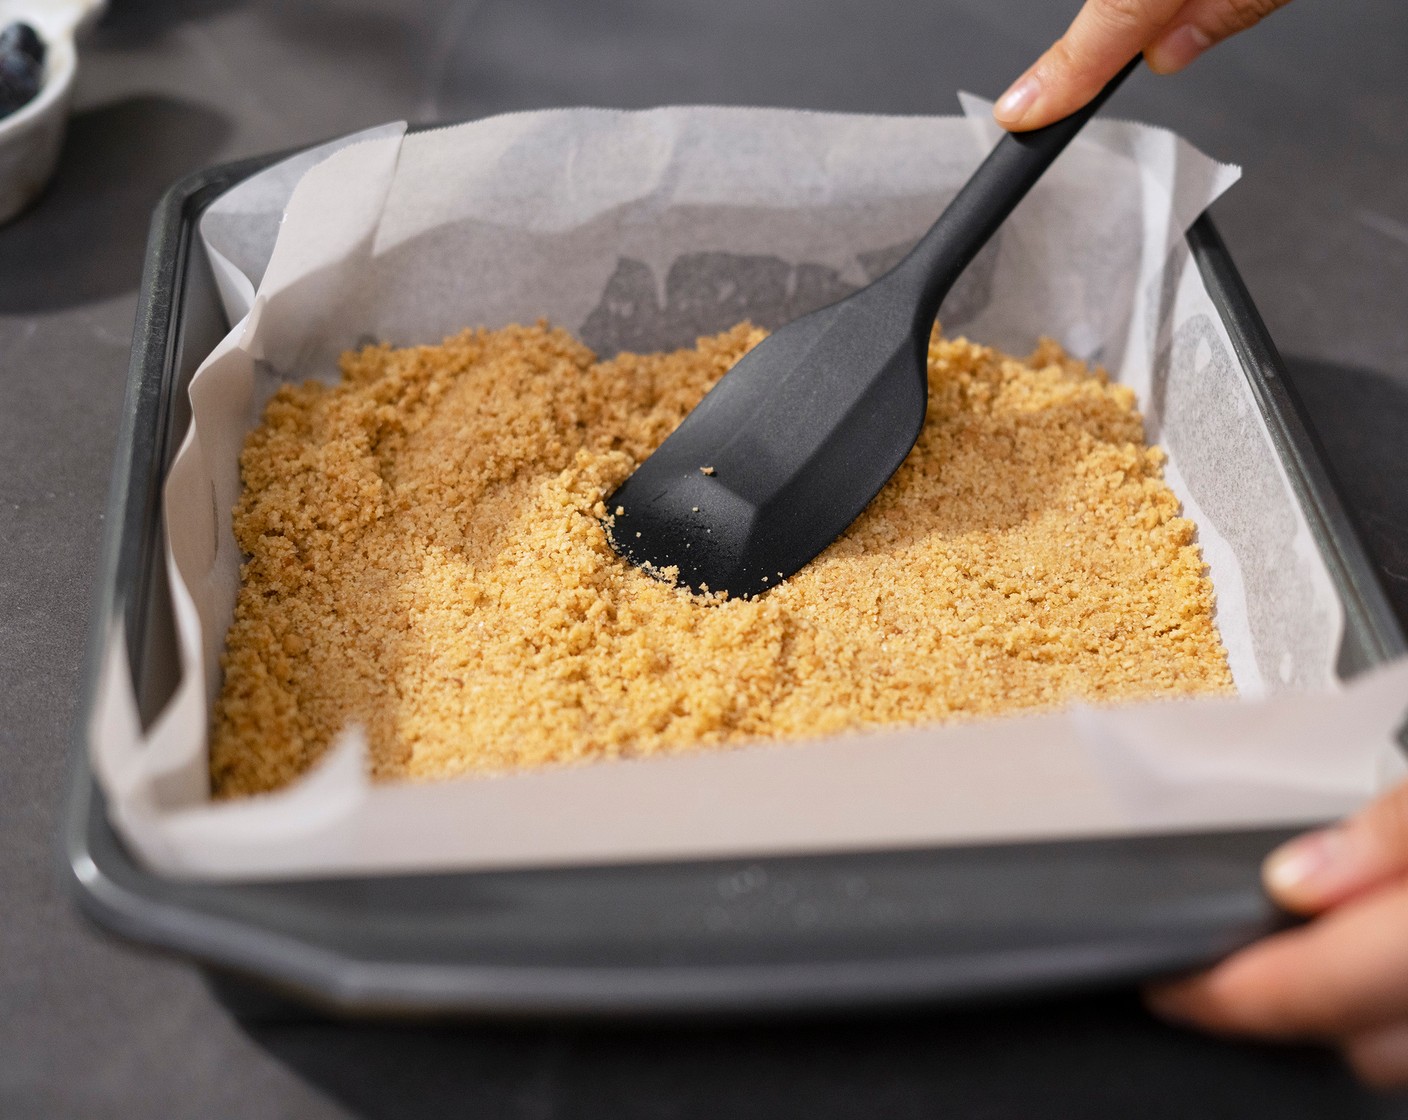 step 3 In a mixing bowl, mix the Digestive Biscuits (1 2/3 cups), Butter (4 Tbsp), Granulated Sugar (1 Tbsp), and Salt (1 pinch) until well combined. Transfer to the lined baking pan, and press the mixture into the bottom of the pan.